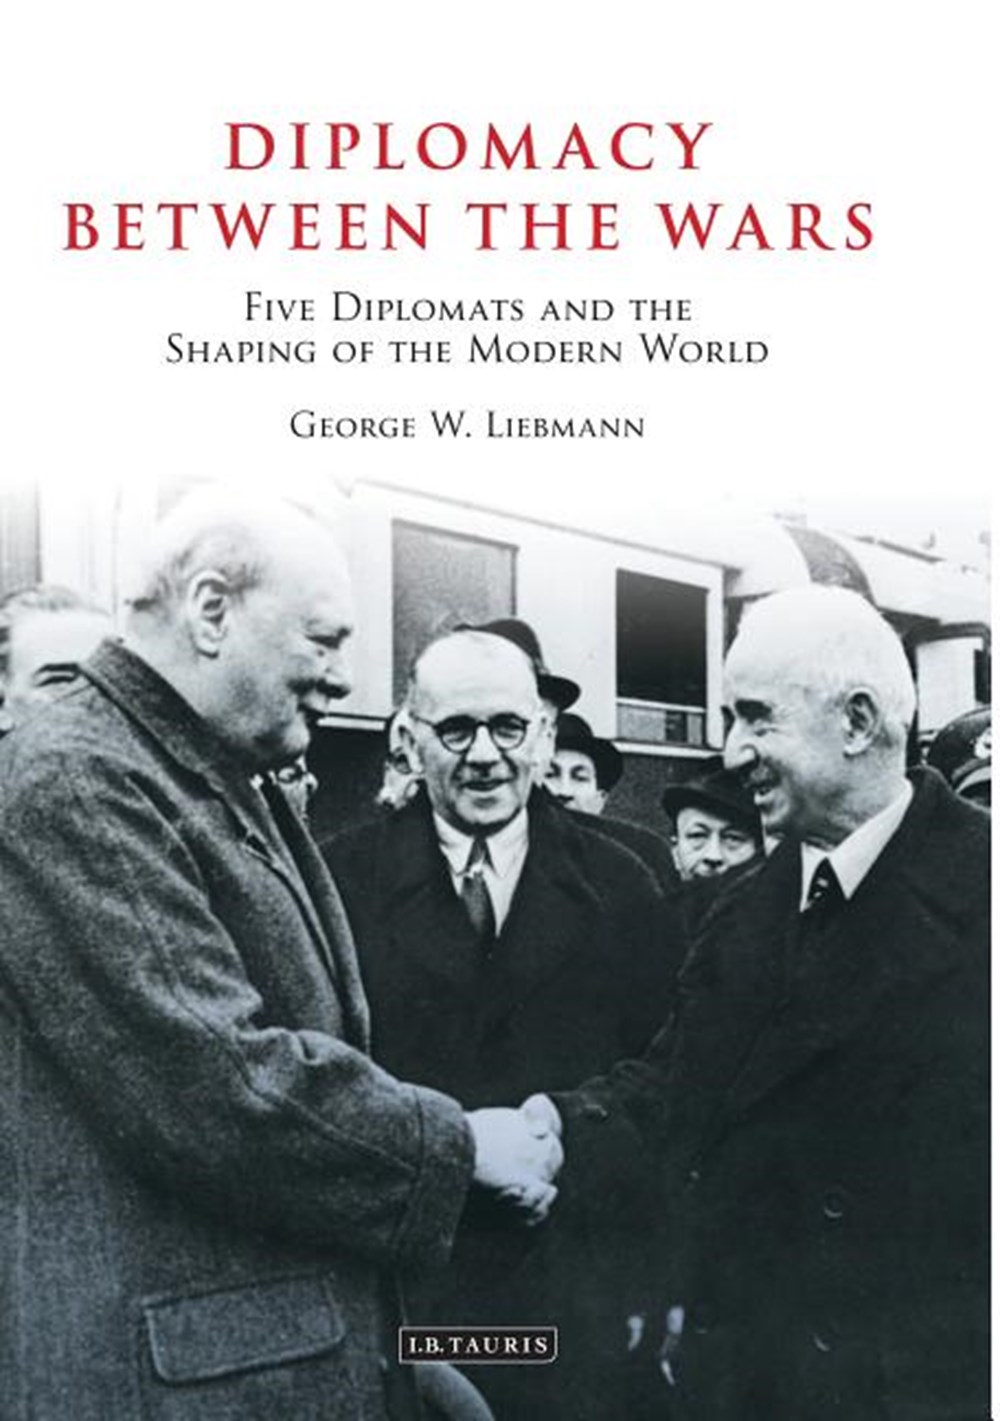 Diplomacy Between the Wars: Five Diplomats and the Shaping of the Modern World